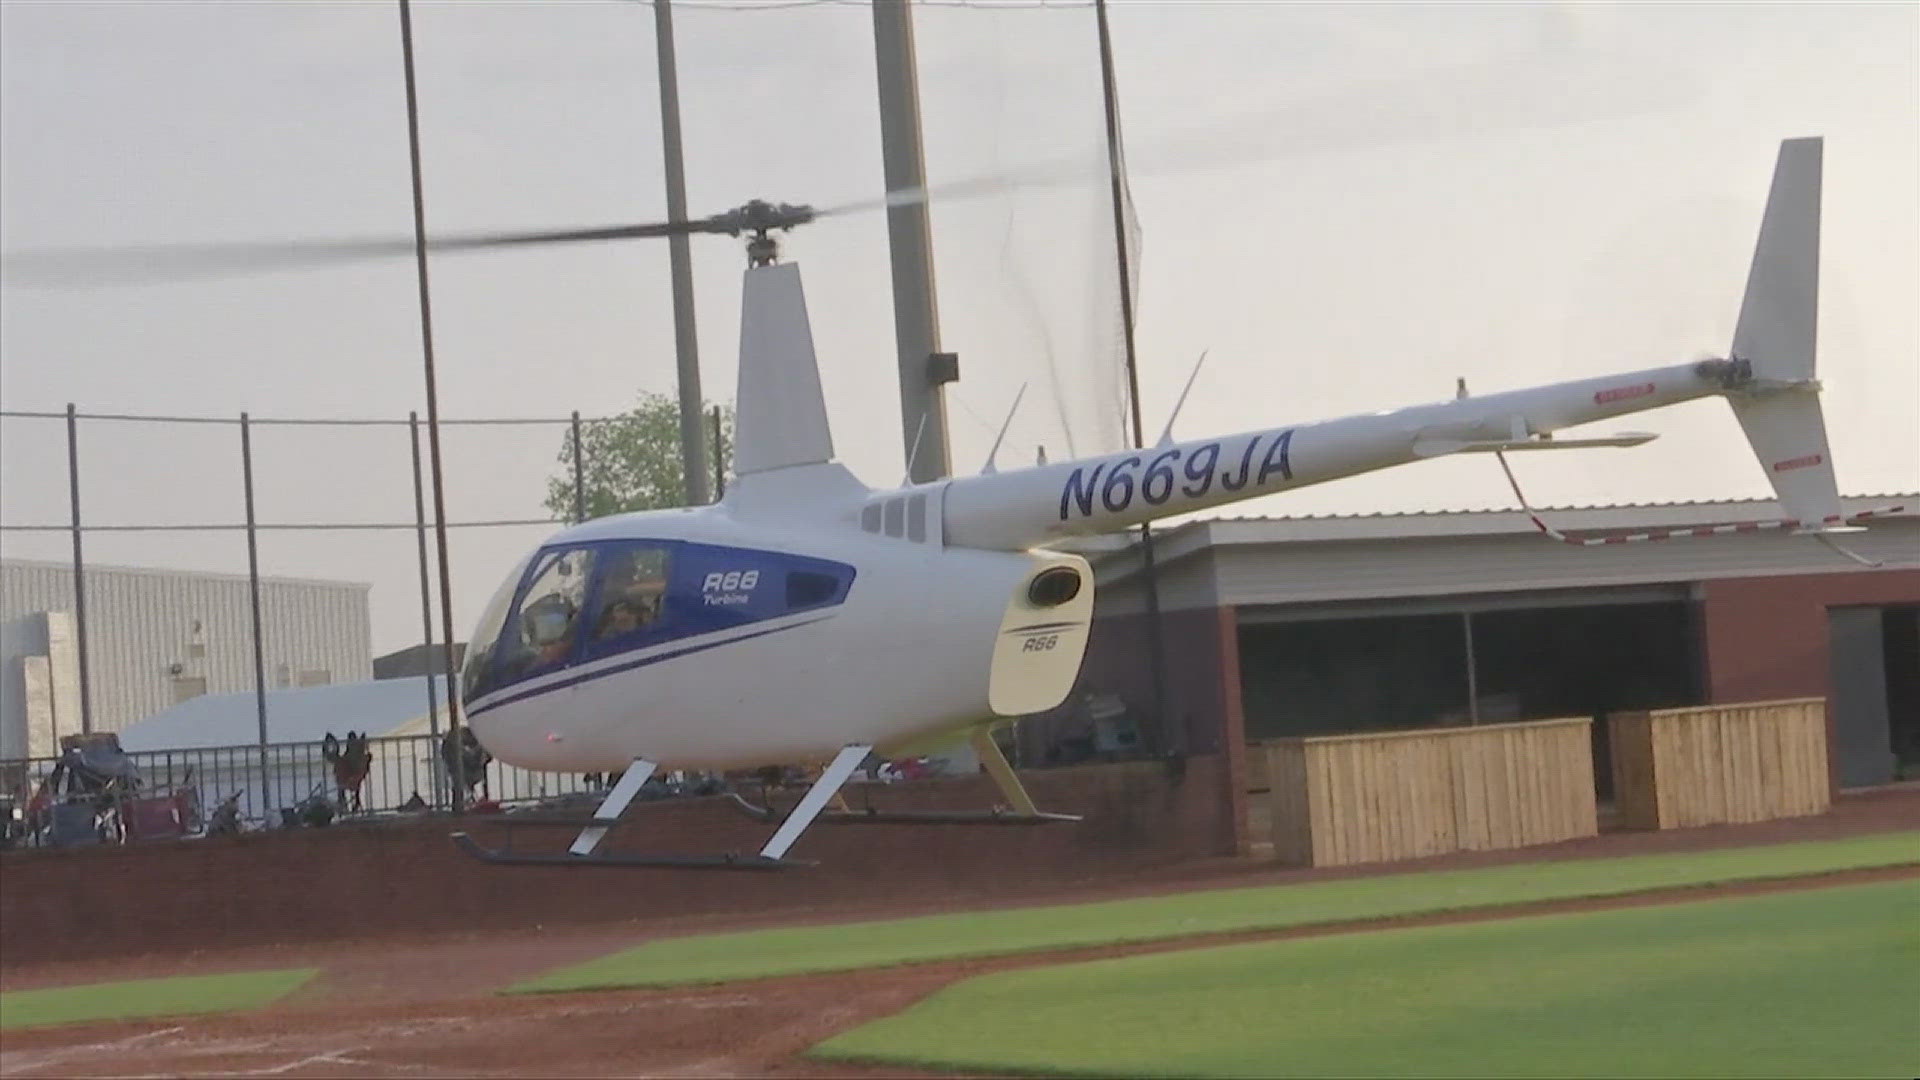 The Tigers led a 2-0 lead before the game went into a rain delay. A privately owned helicopter flew to Rogersville from Muscle Shoals to help the drying effort.